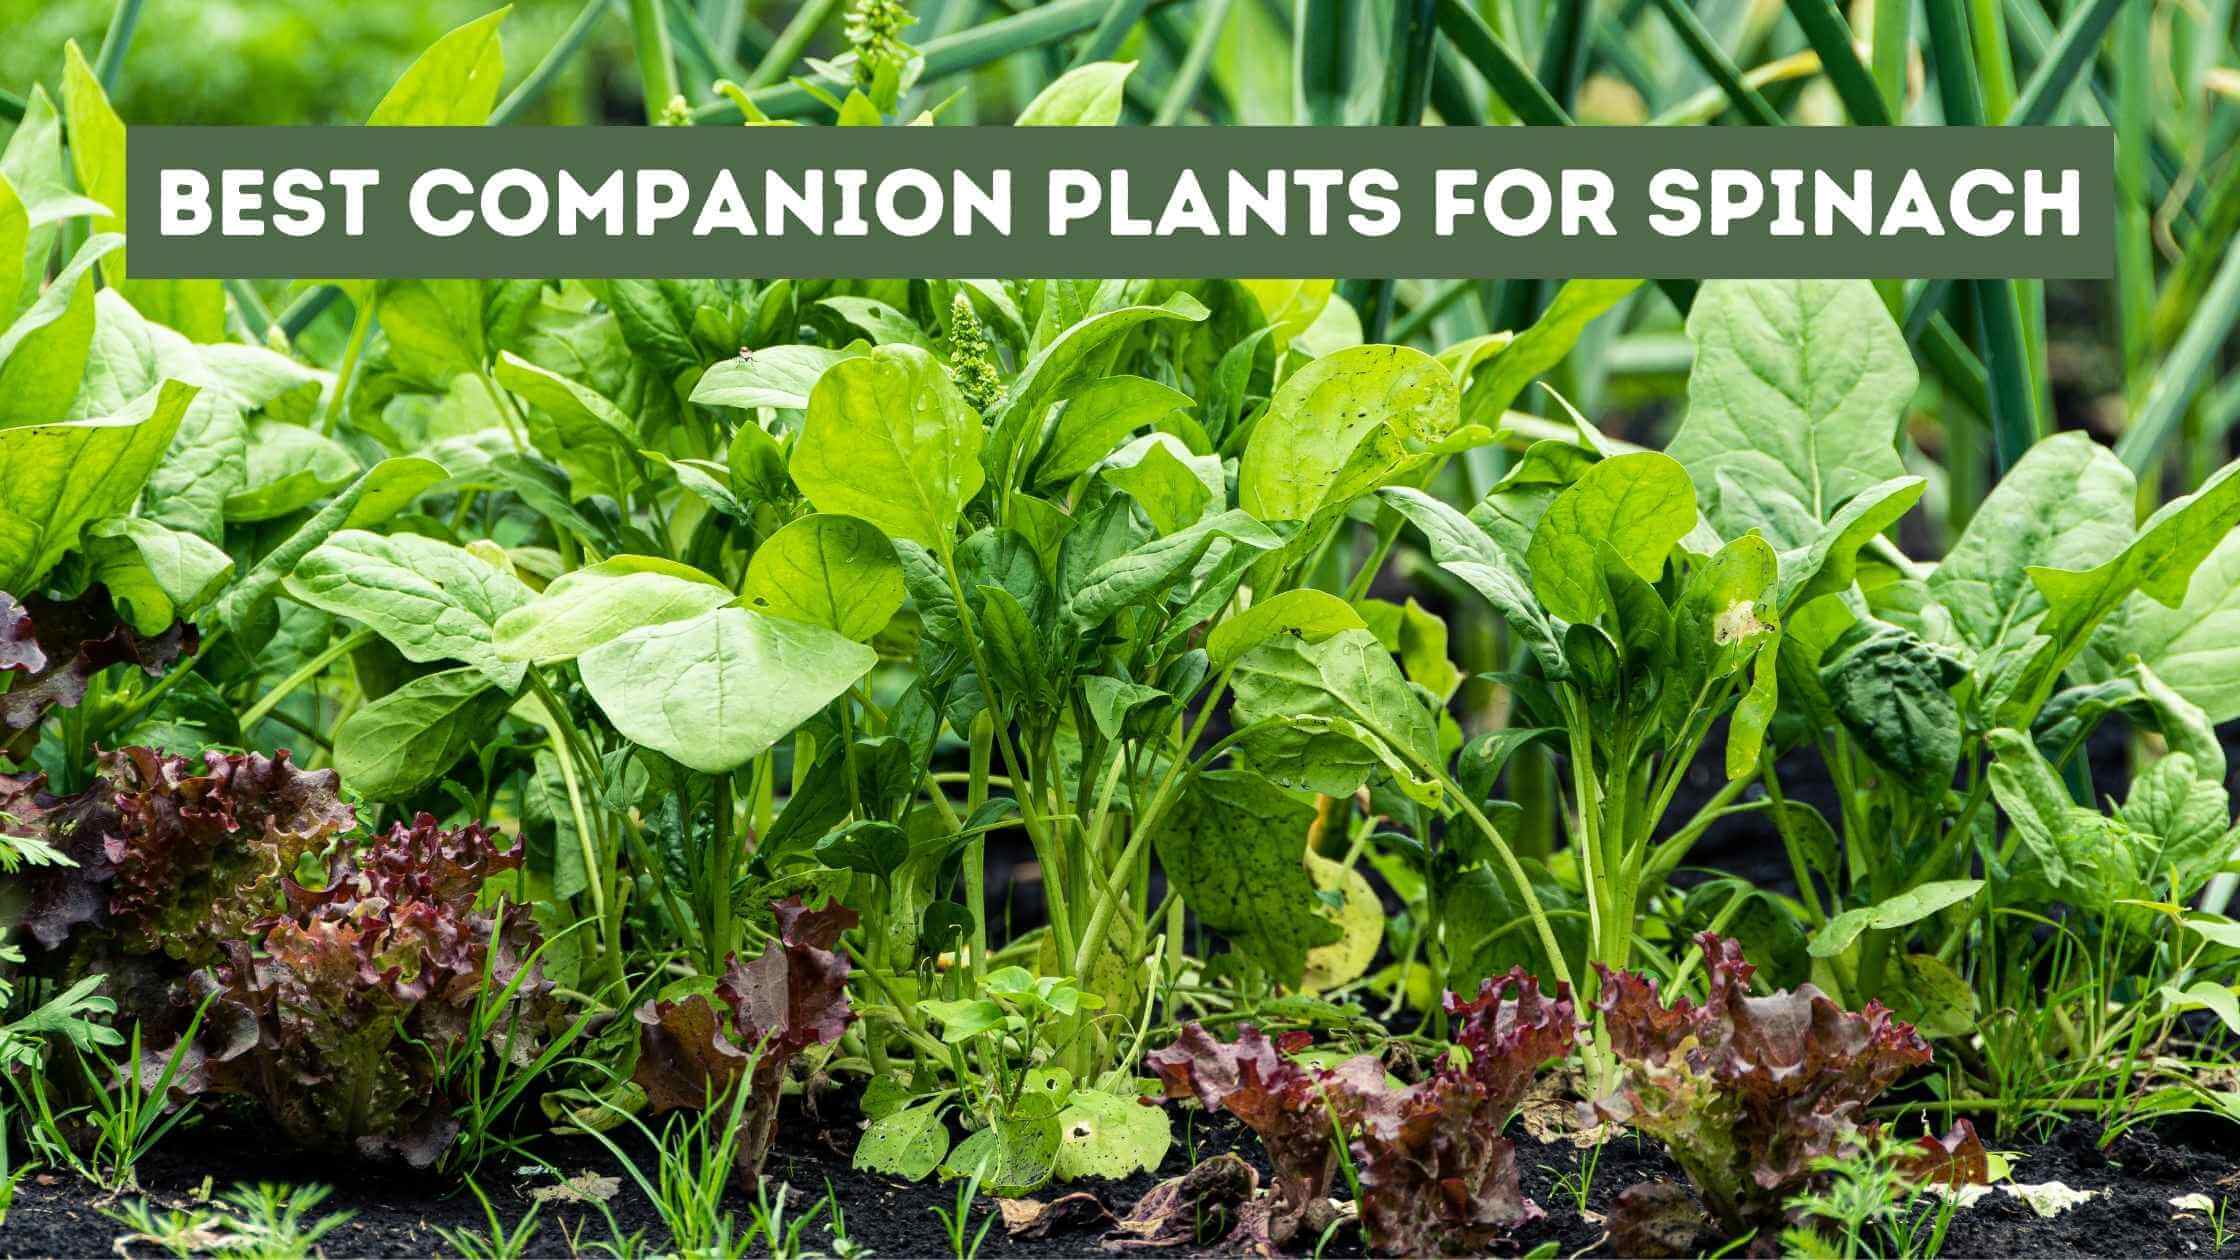 Companion Plants for Spinach